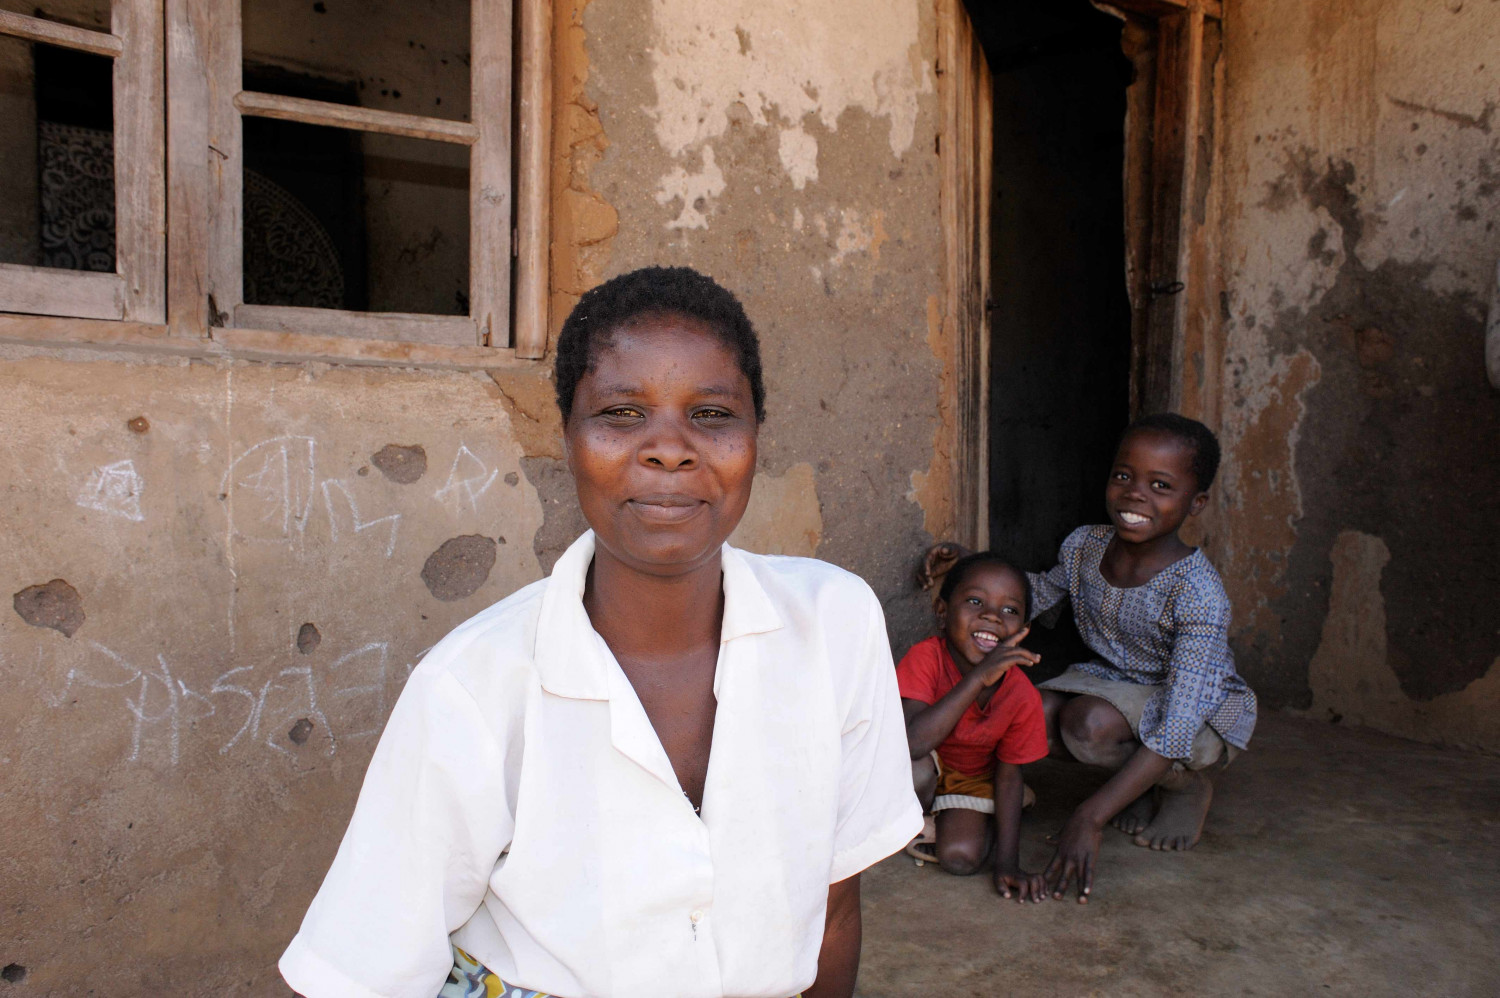 A woman and two children stood smiling outside a house in Mangochi, Malawi